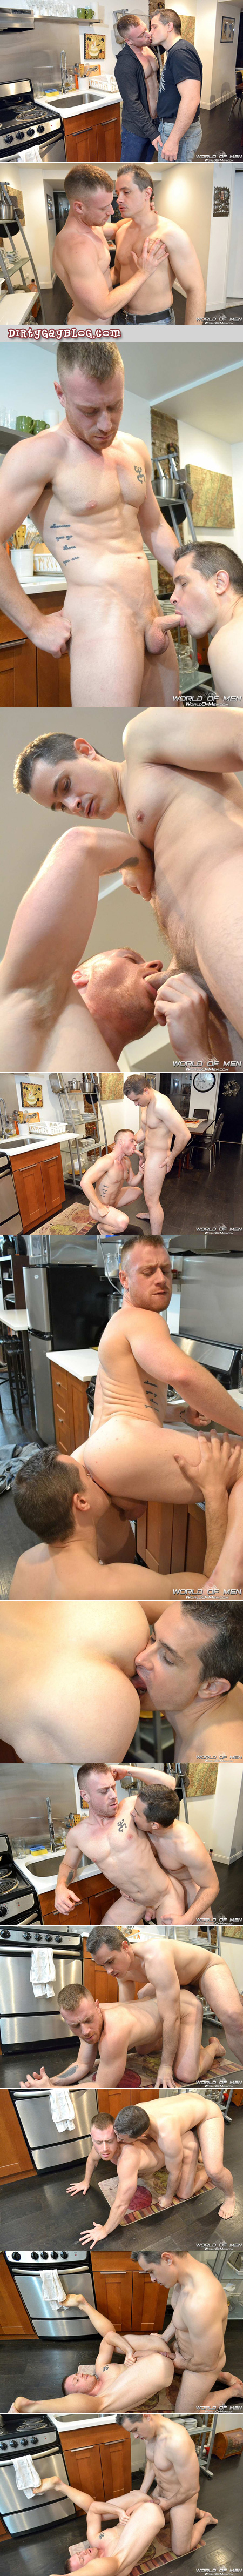 Clean cut guy fucks a horny ginger muscle stud on the kitchen floor.